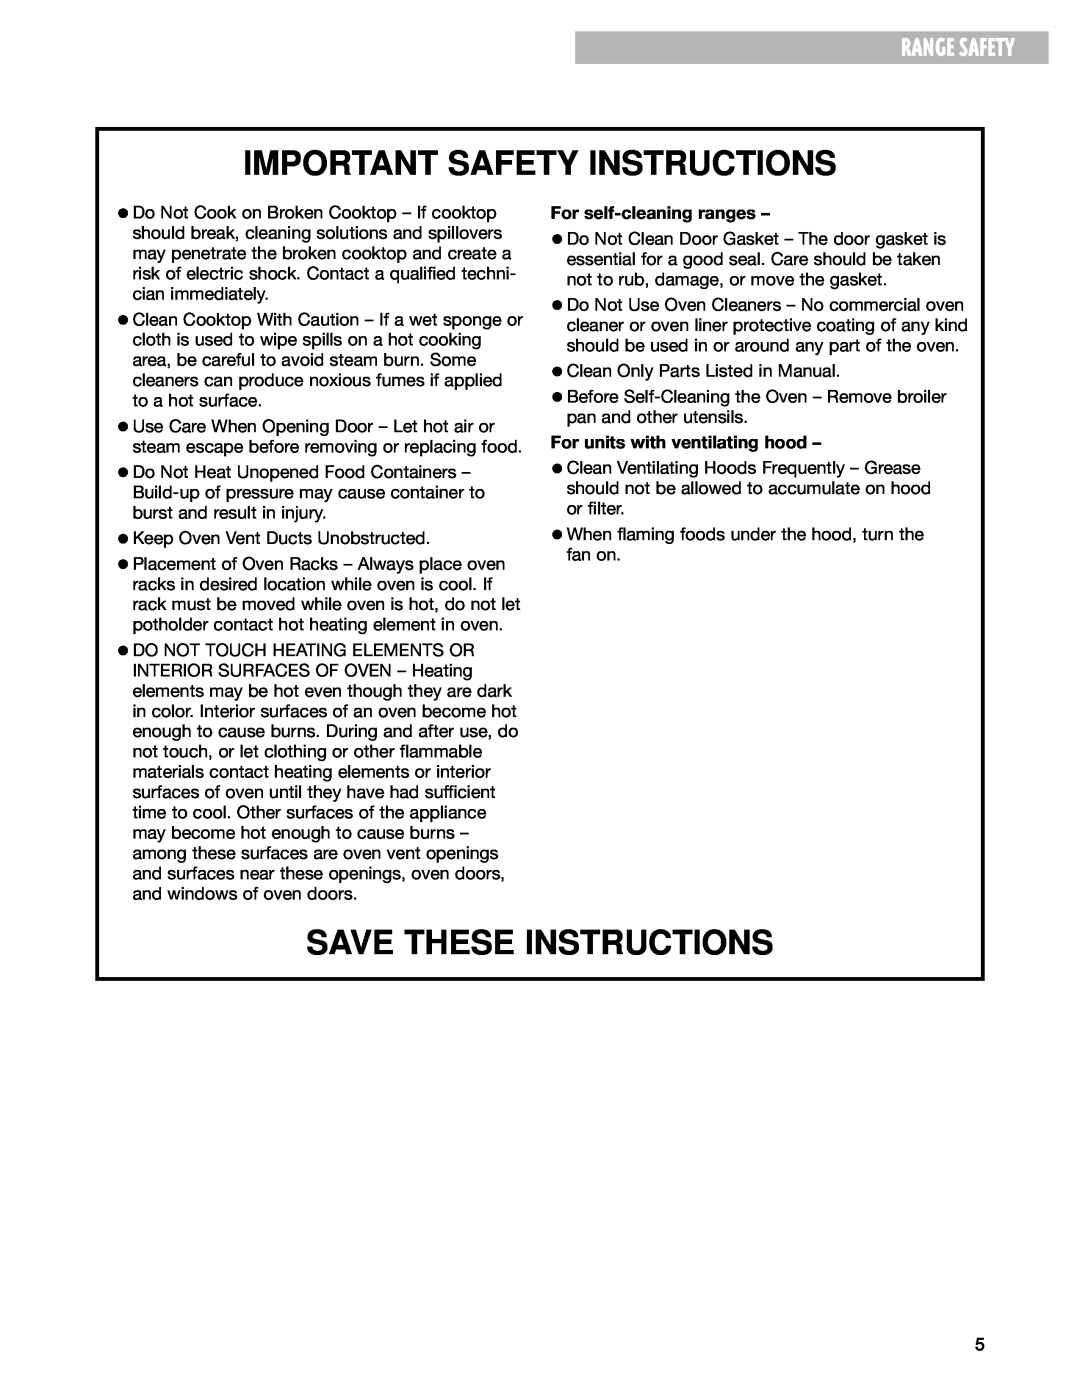 Whirlpool RF325PXG warranty Important Safety Instructions, Save These Instructions, Range Safety, For self-cleaning ranges 